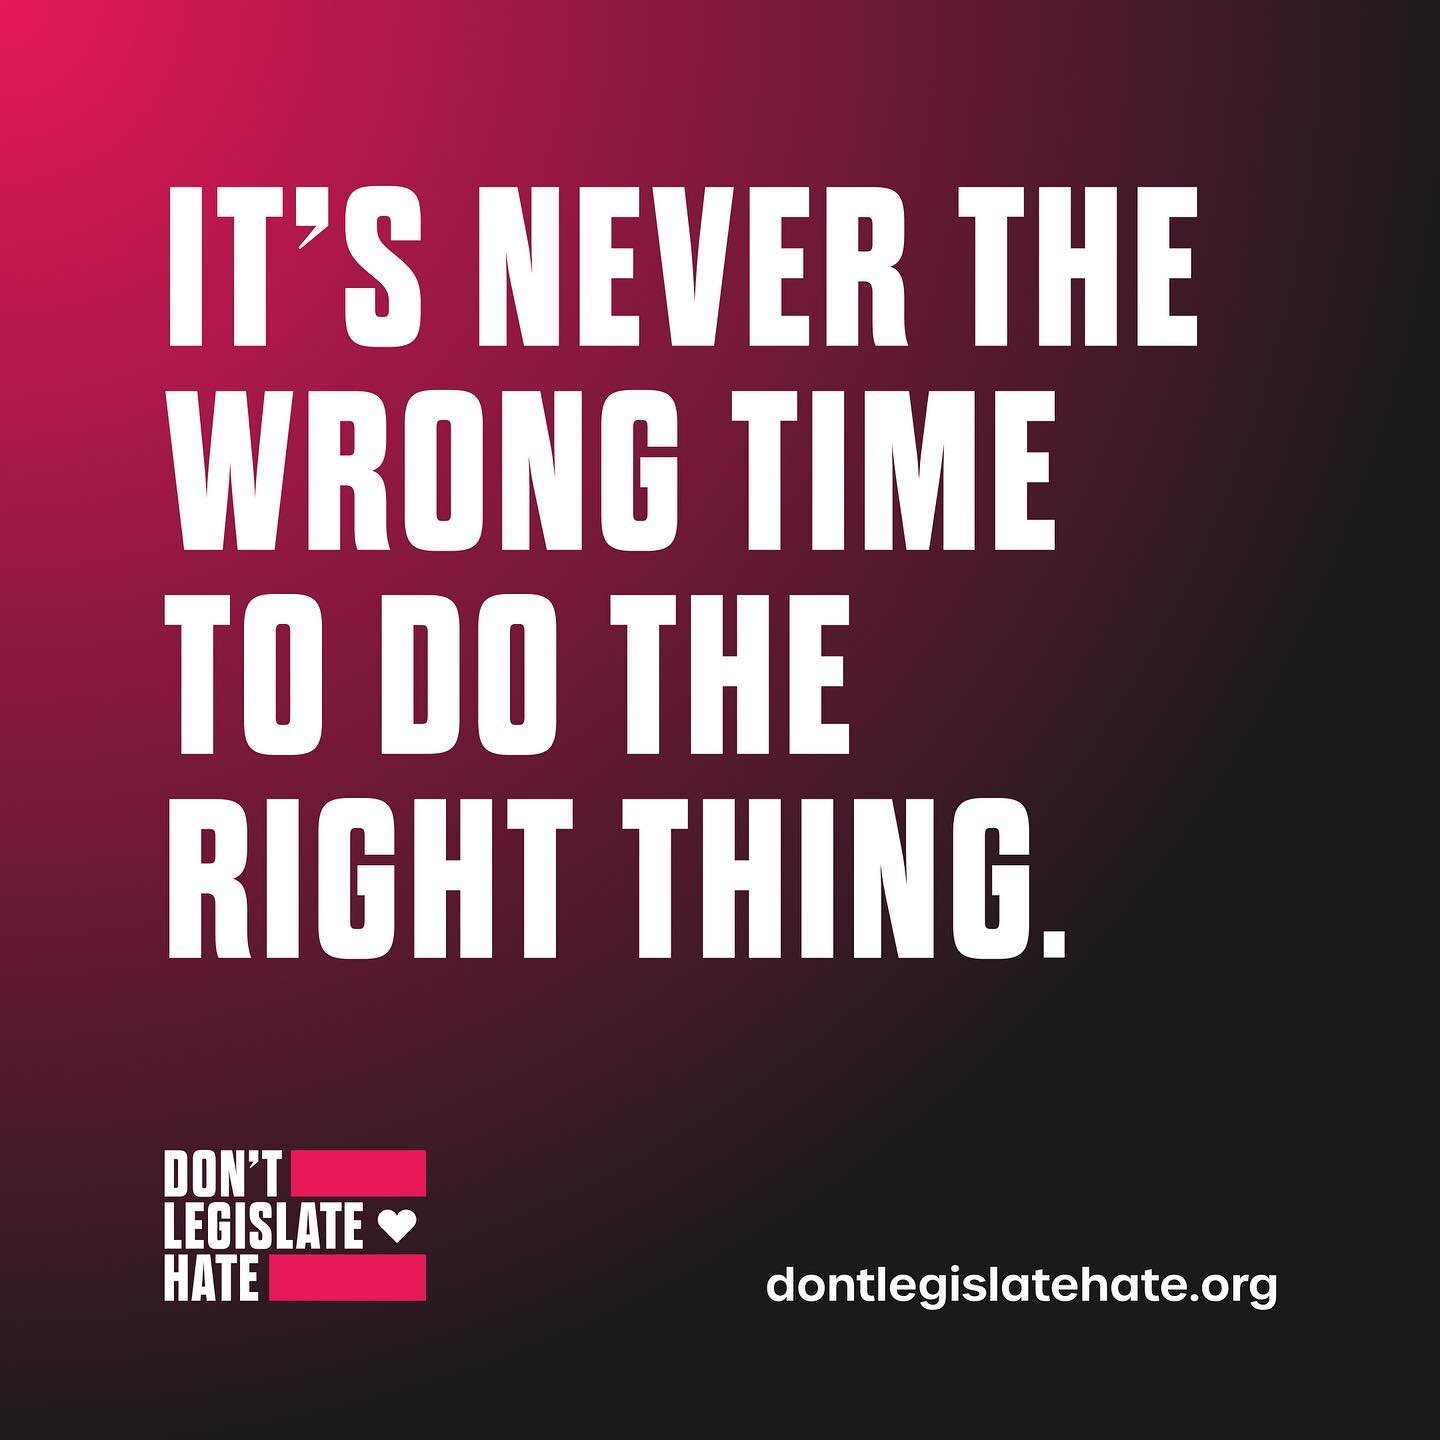 It's never the wrong time to do the right thing. Join our movement to elect leaders who will stop the ongoing wave of anti-trans legislation across the country. Link in bio.